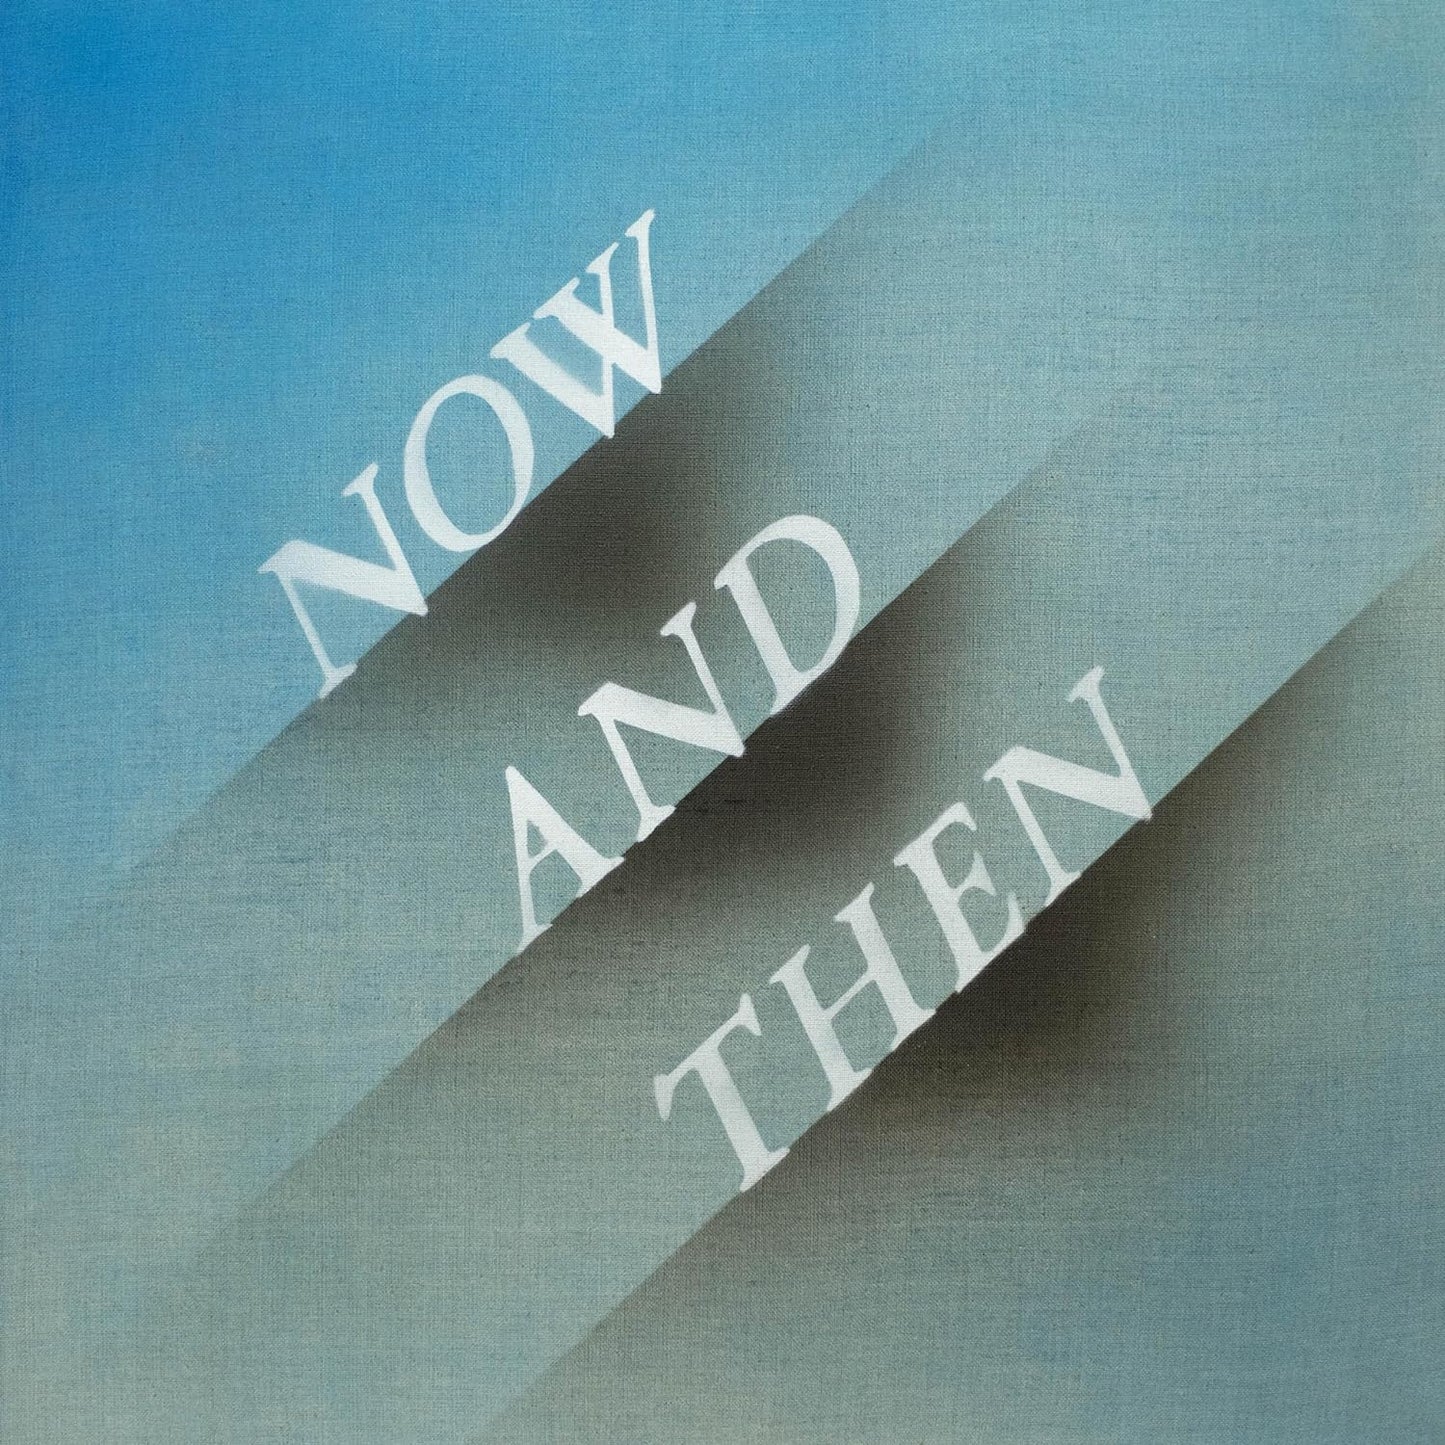 CD - The Beatles - Now And Then